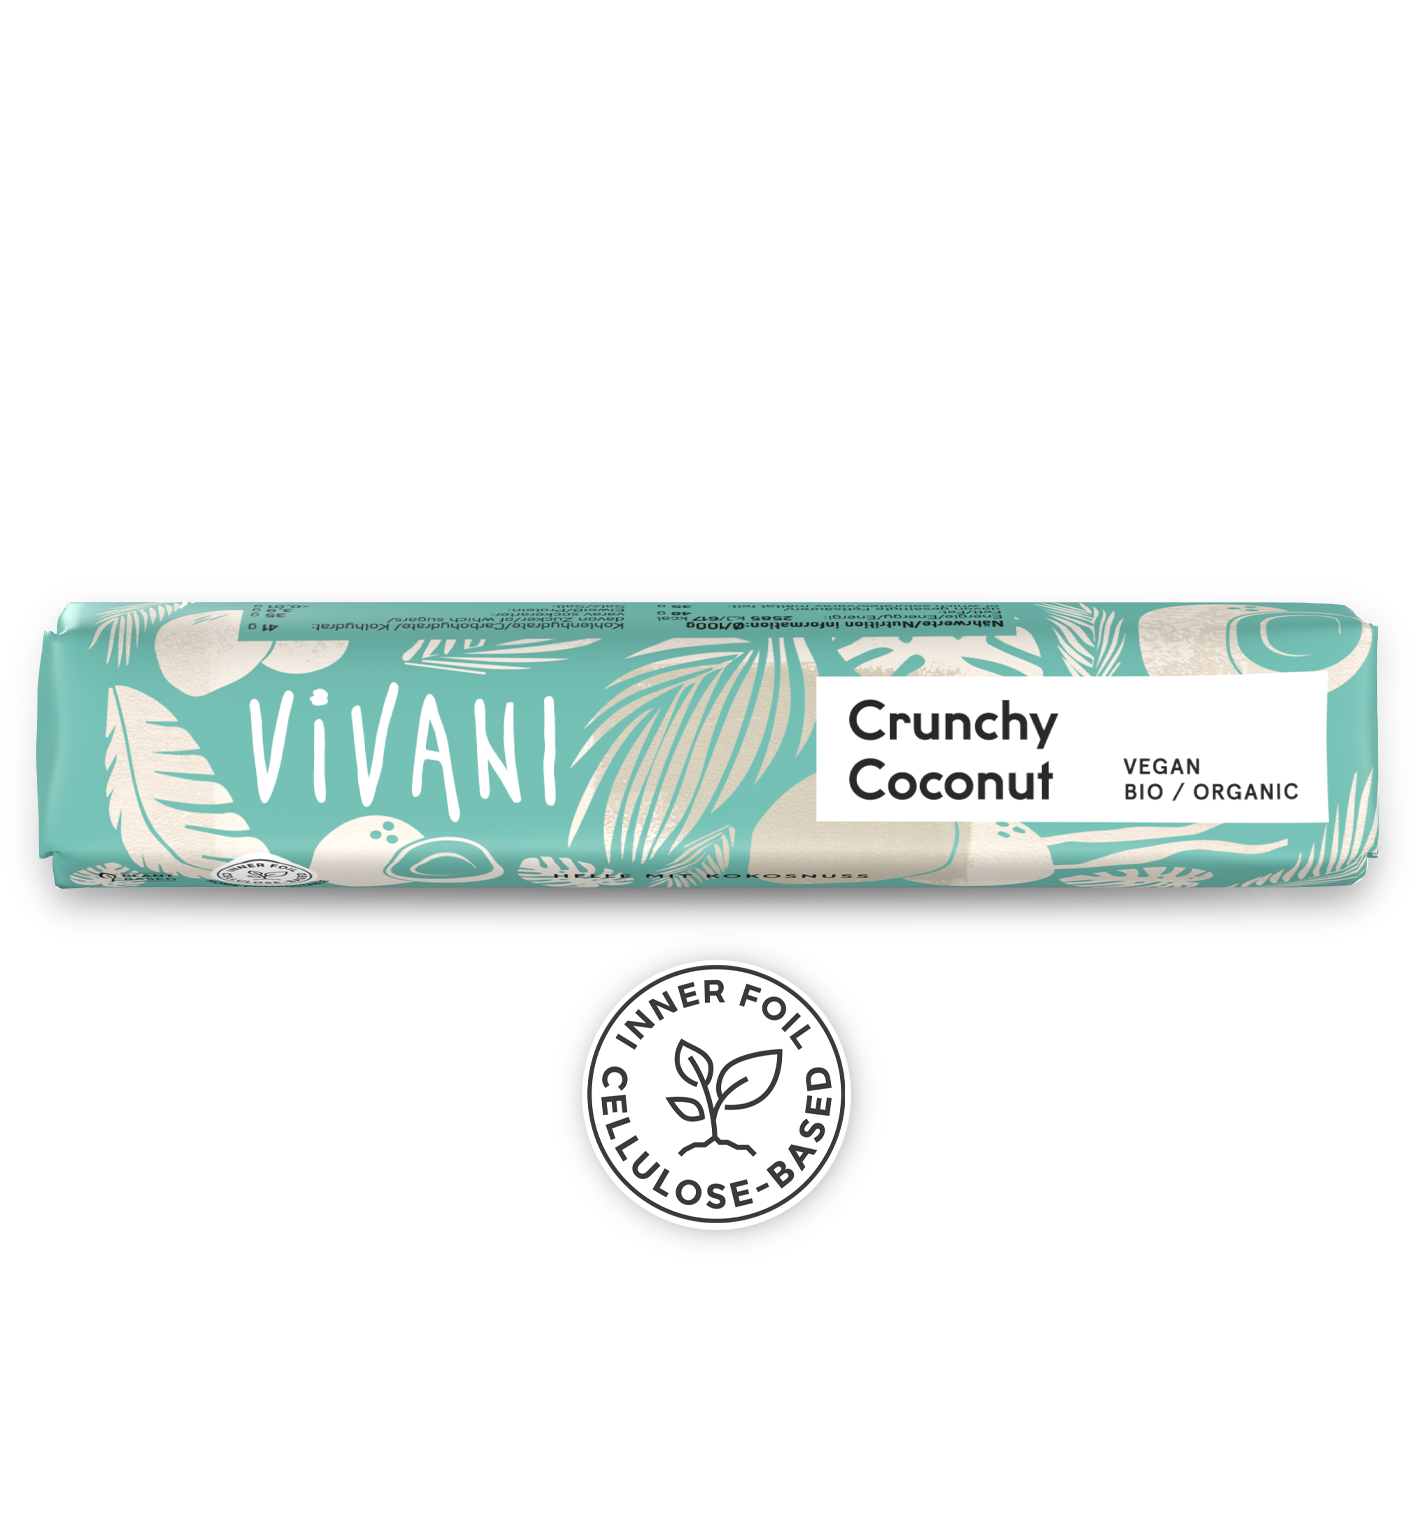 VIVANI's organic and vegan chocolate bar Chrunchy Coconut with coconut paste and roasted coconut flakes